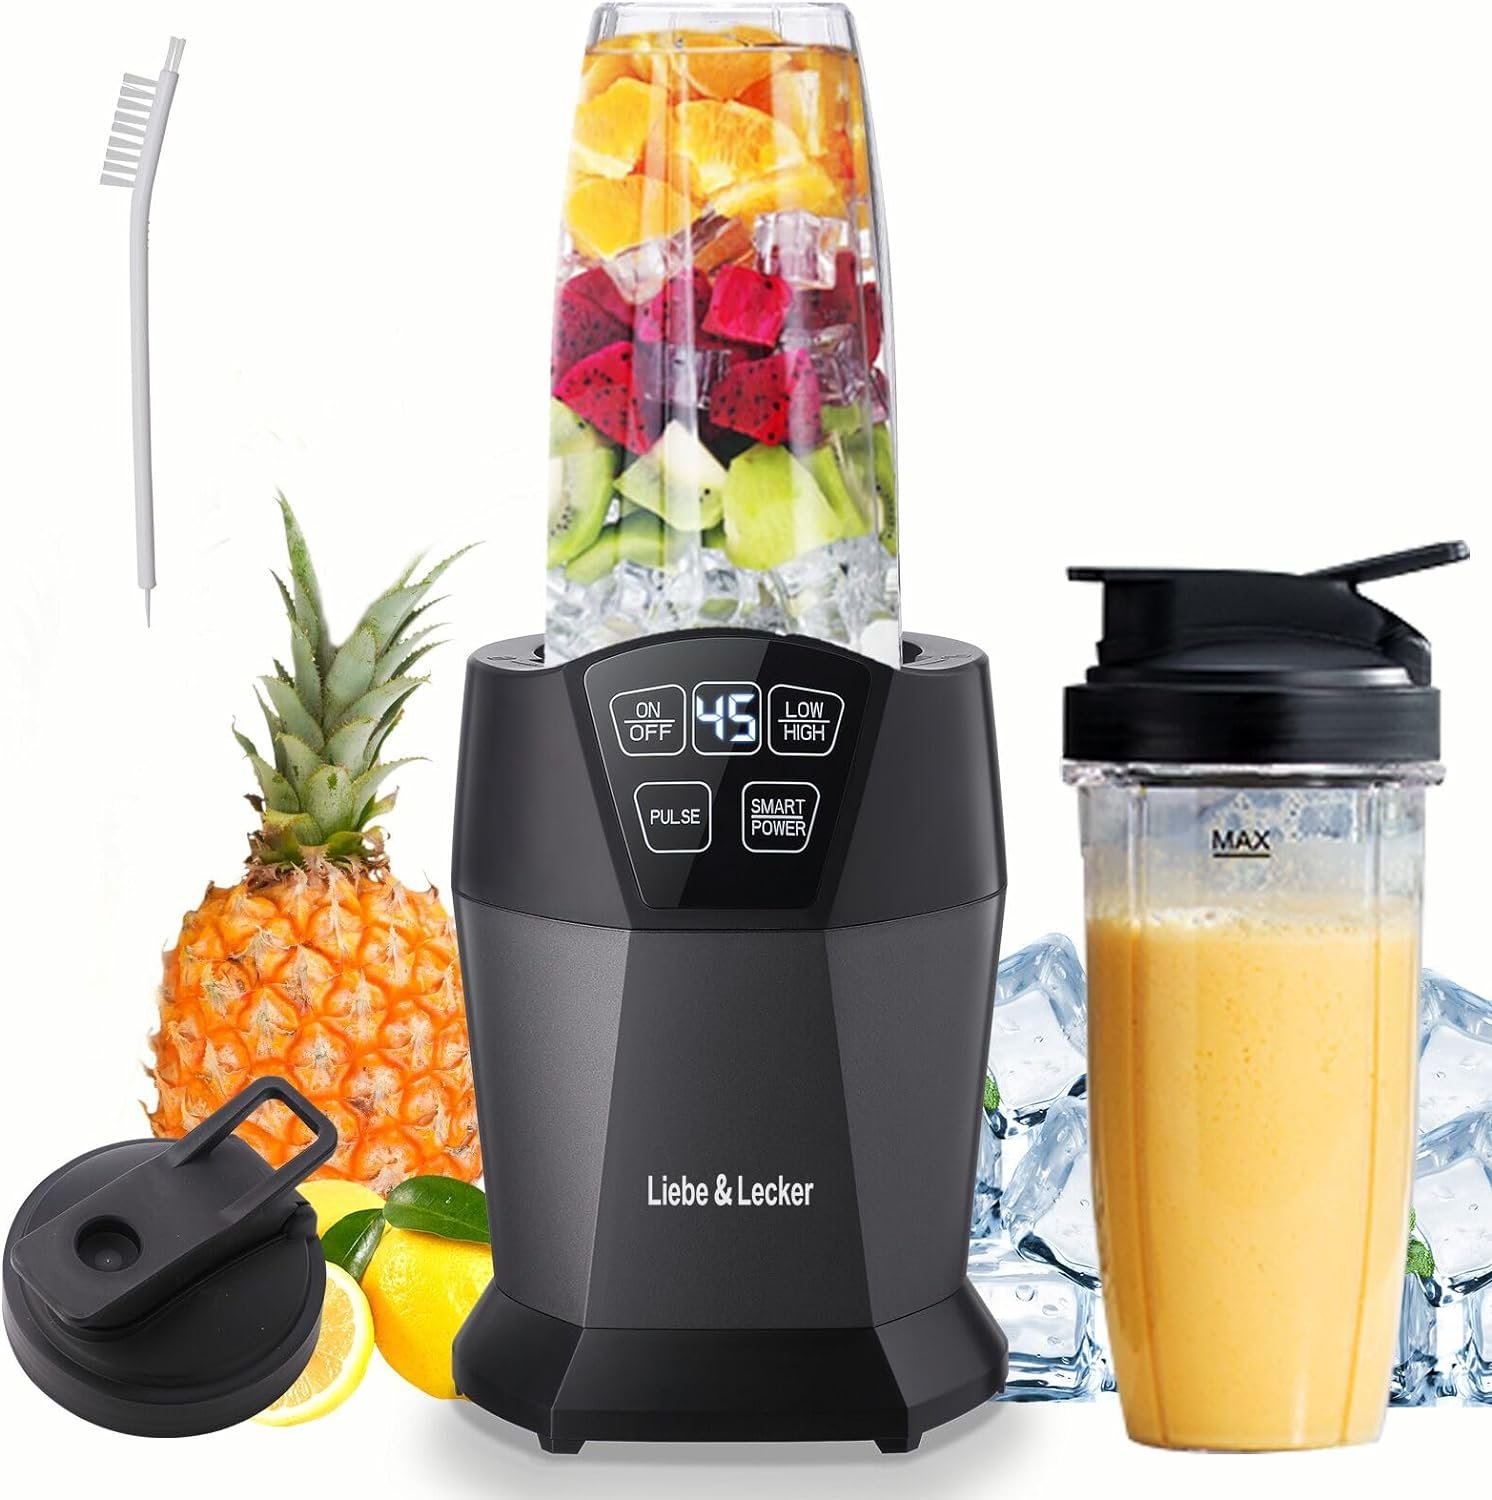 Liebe  Lecker Personal Blender with 1200W-Peak-Watts, Smart technology for Frozen Drinks, Shakes, Smoothies  Sauces, with two 28-oz To-go Cups  Spout Lids, Black